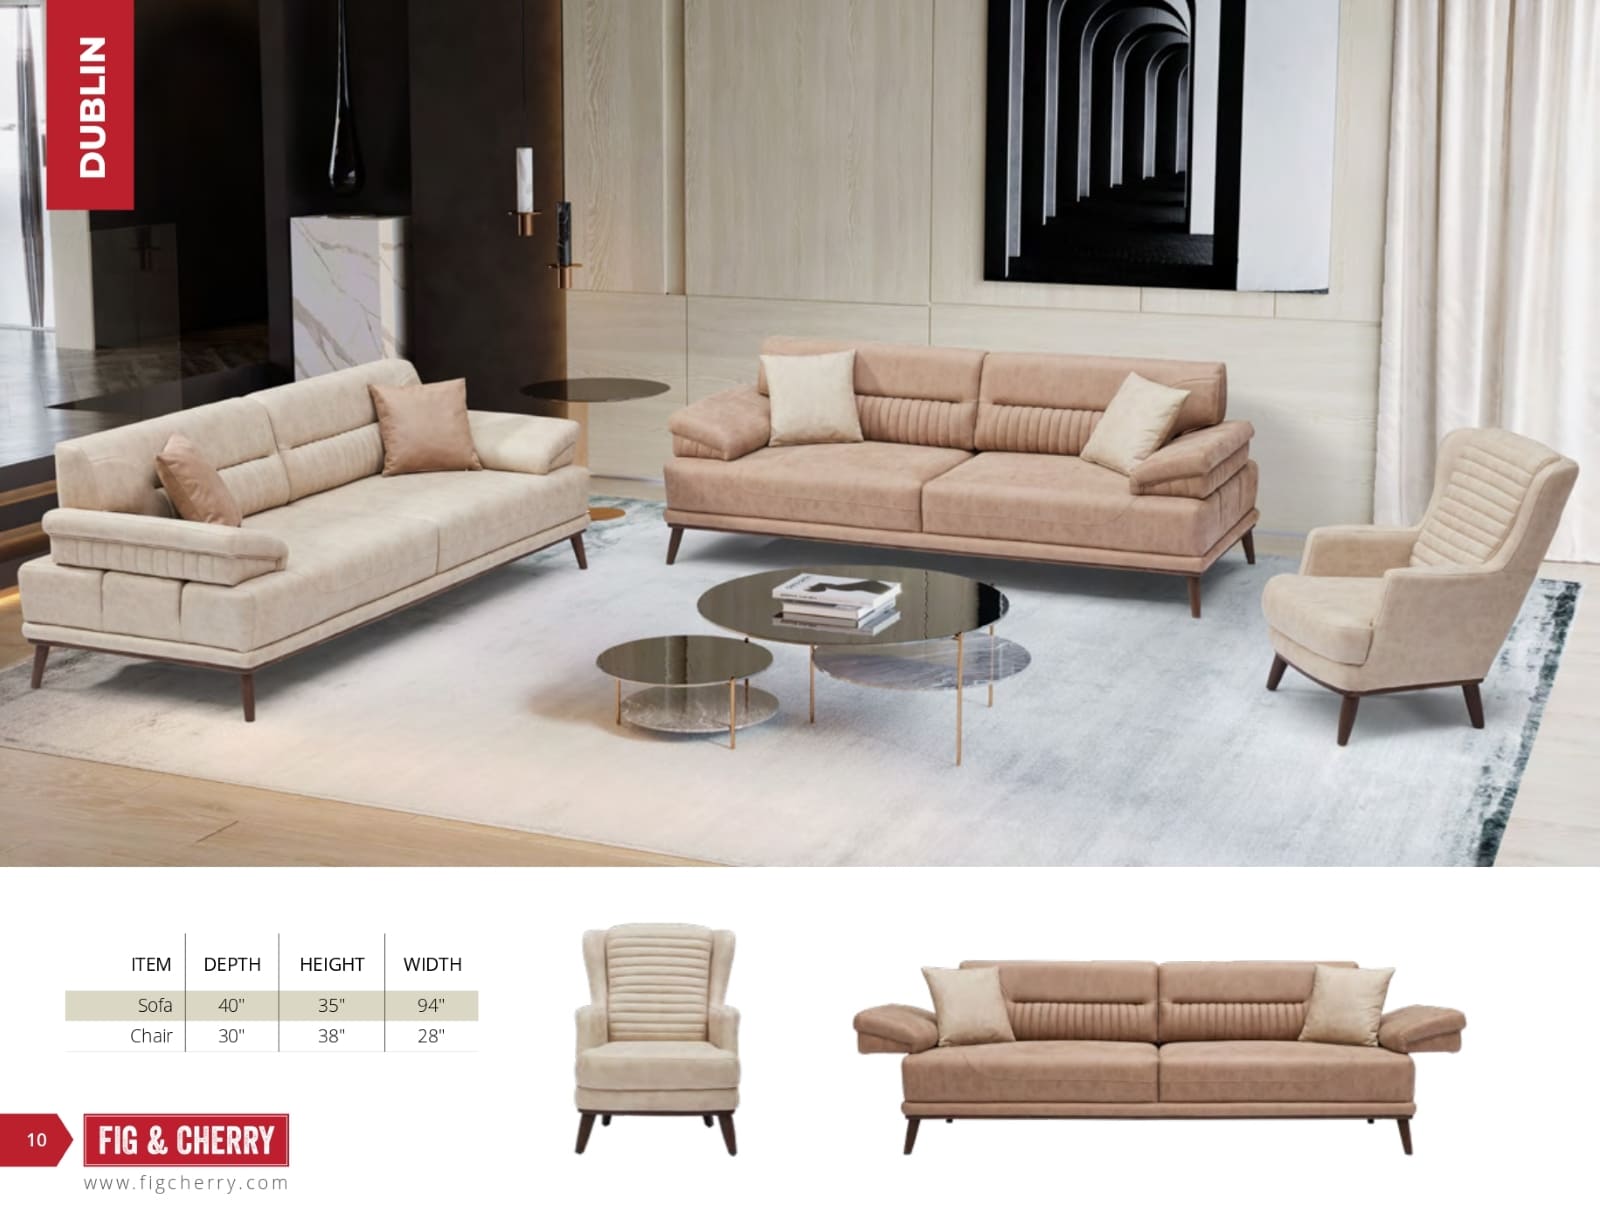 Fig & Cherry Indoor Collection (Sofas and Sectionals) Catalog (10)